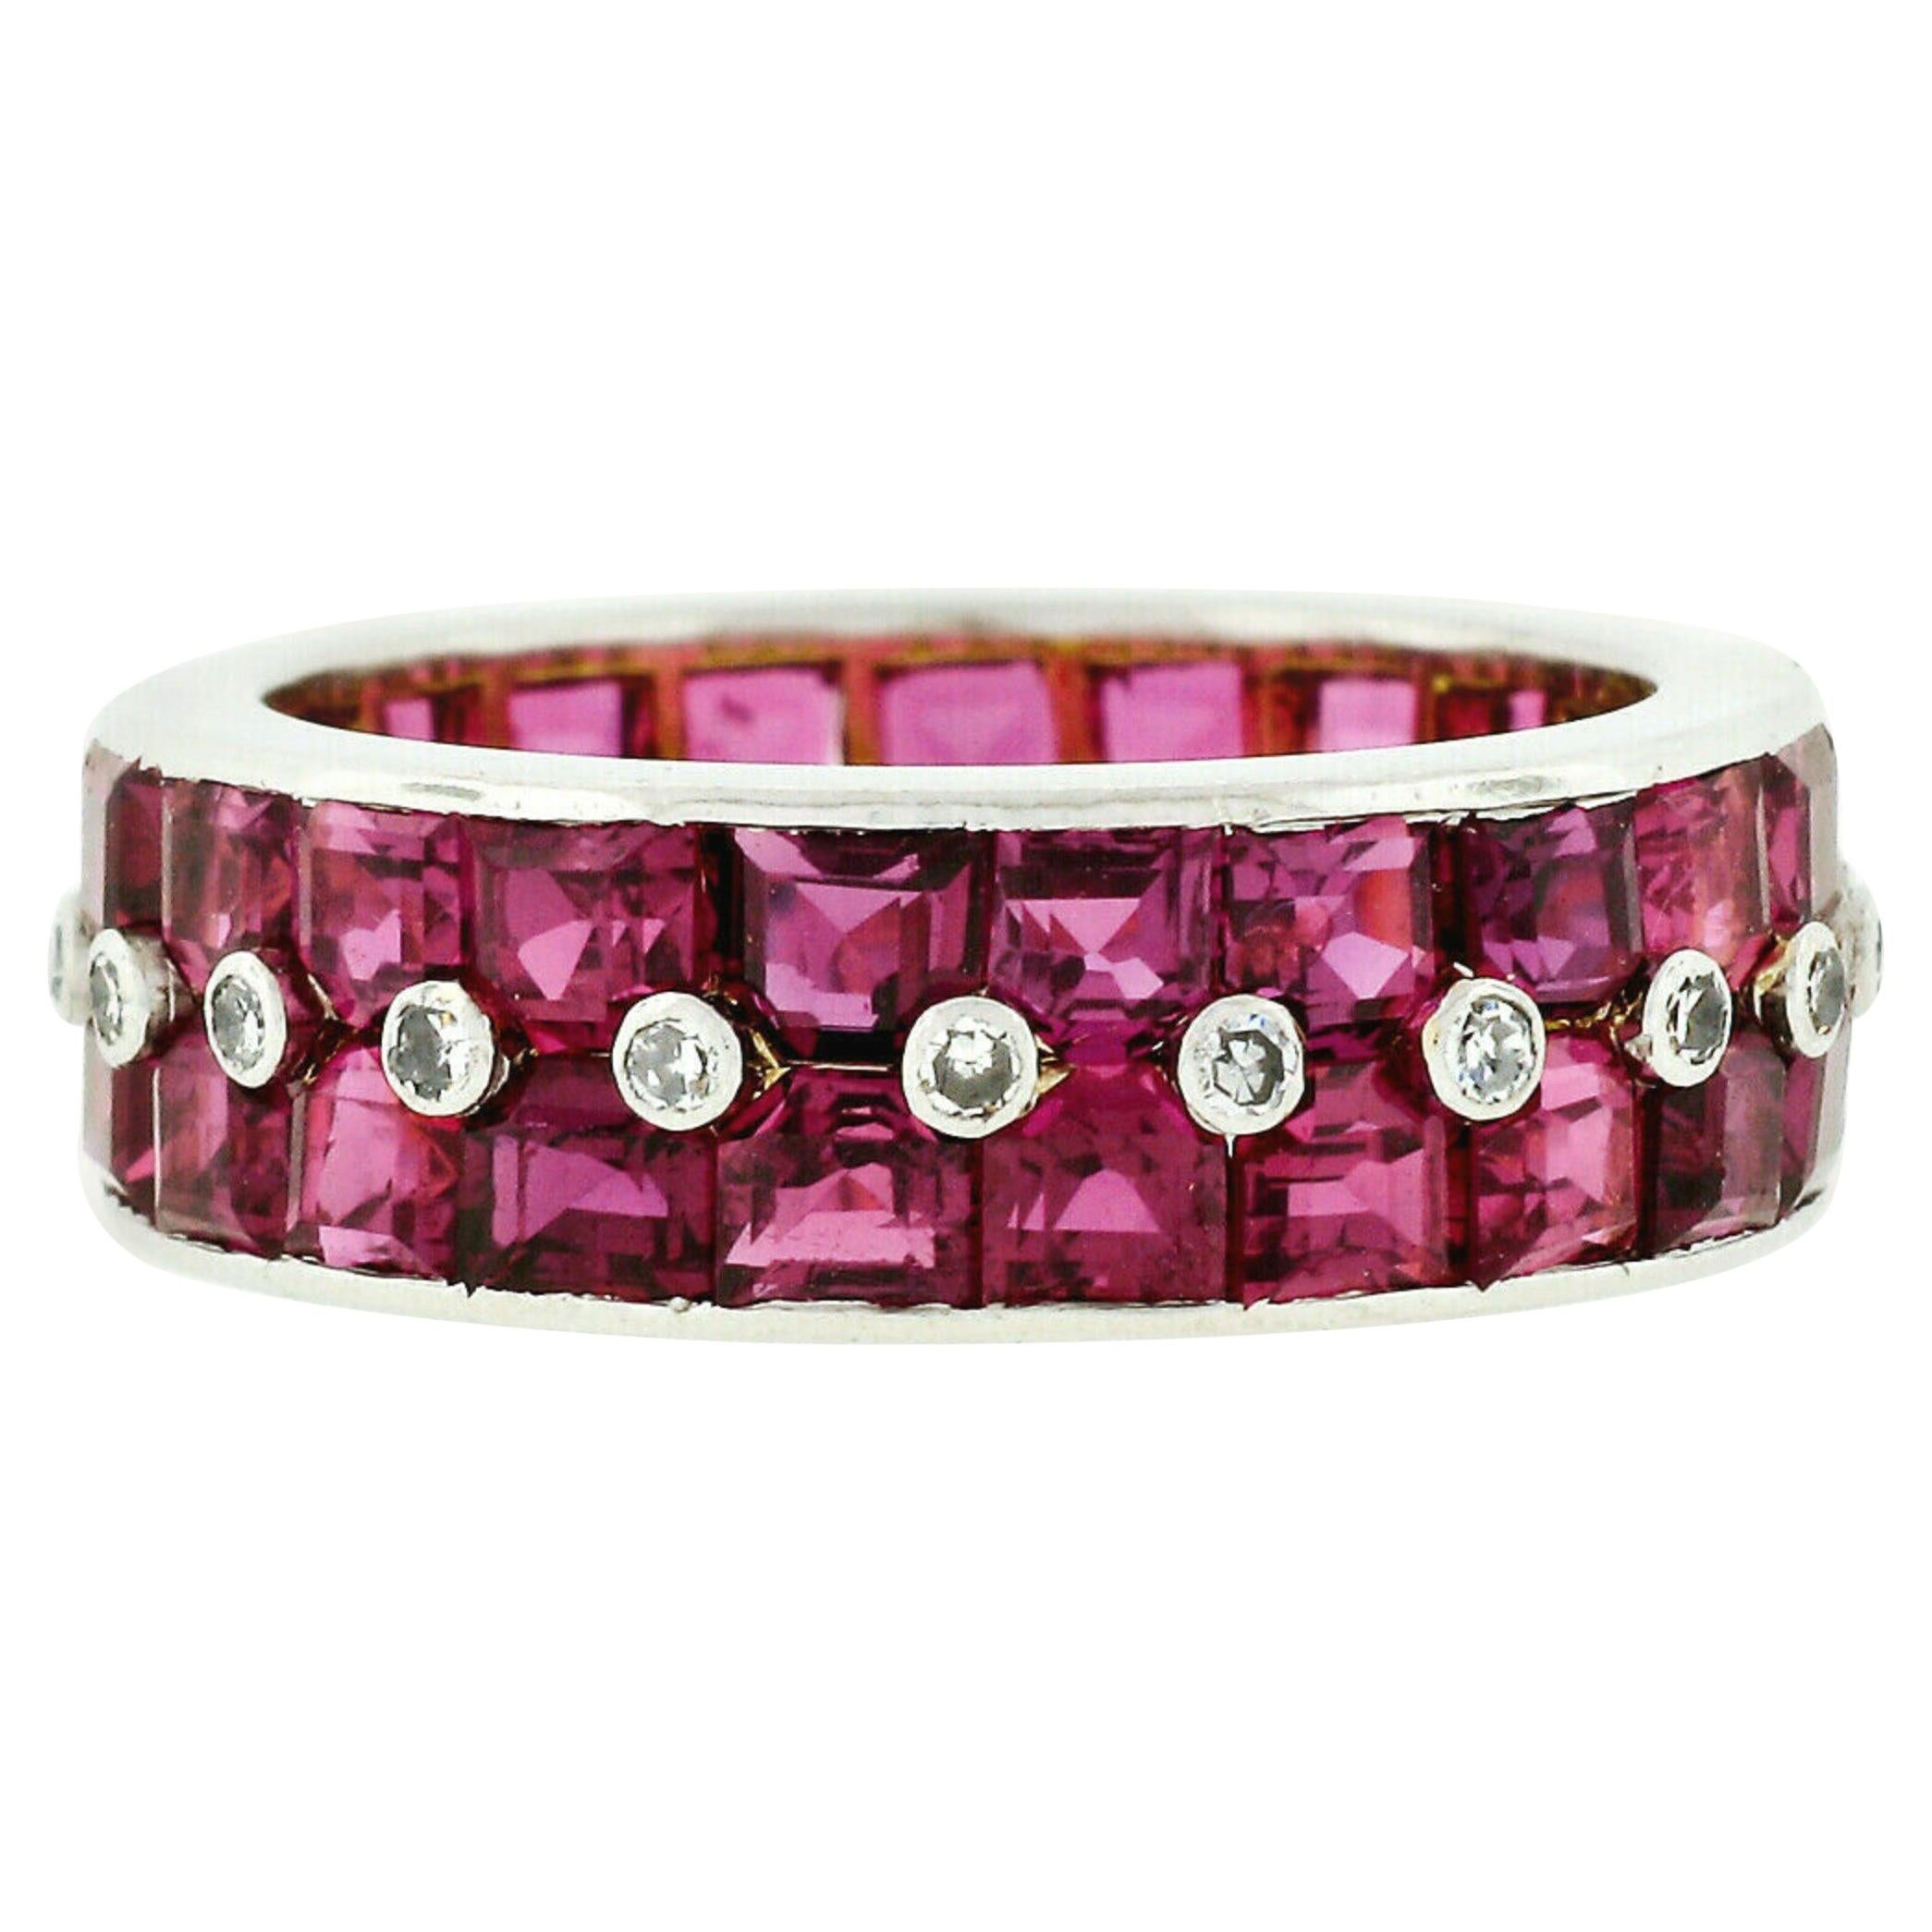 Antique Platinum Channel Square Step Cut Ruby & Diamond Wide Eternity Band Ring